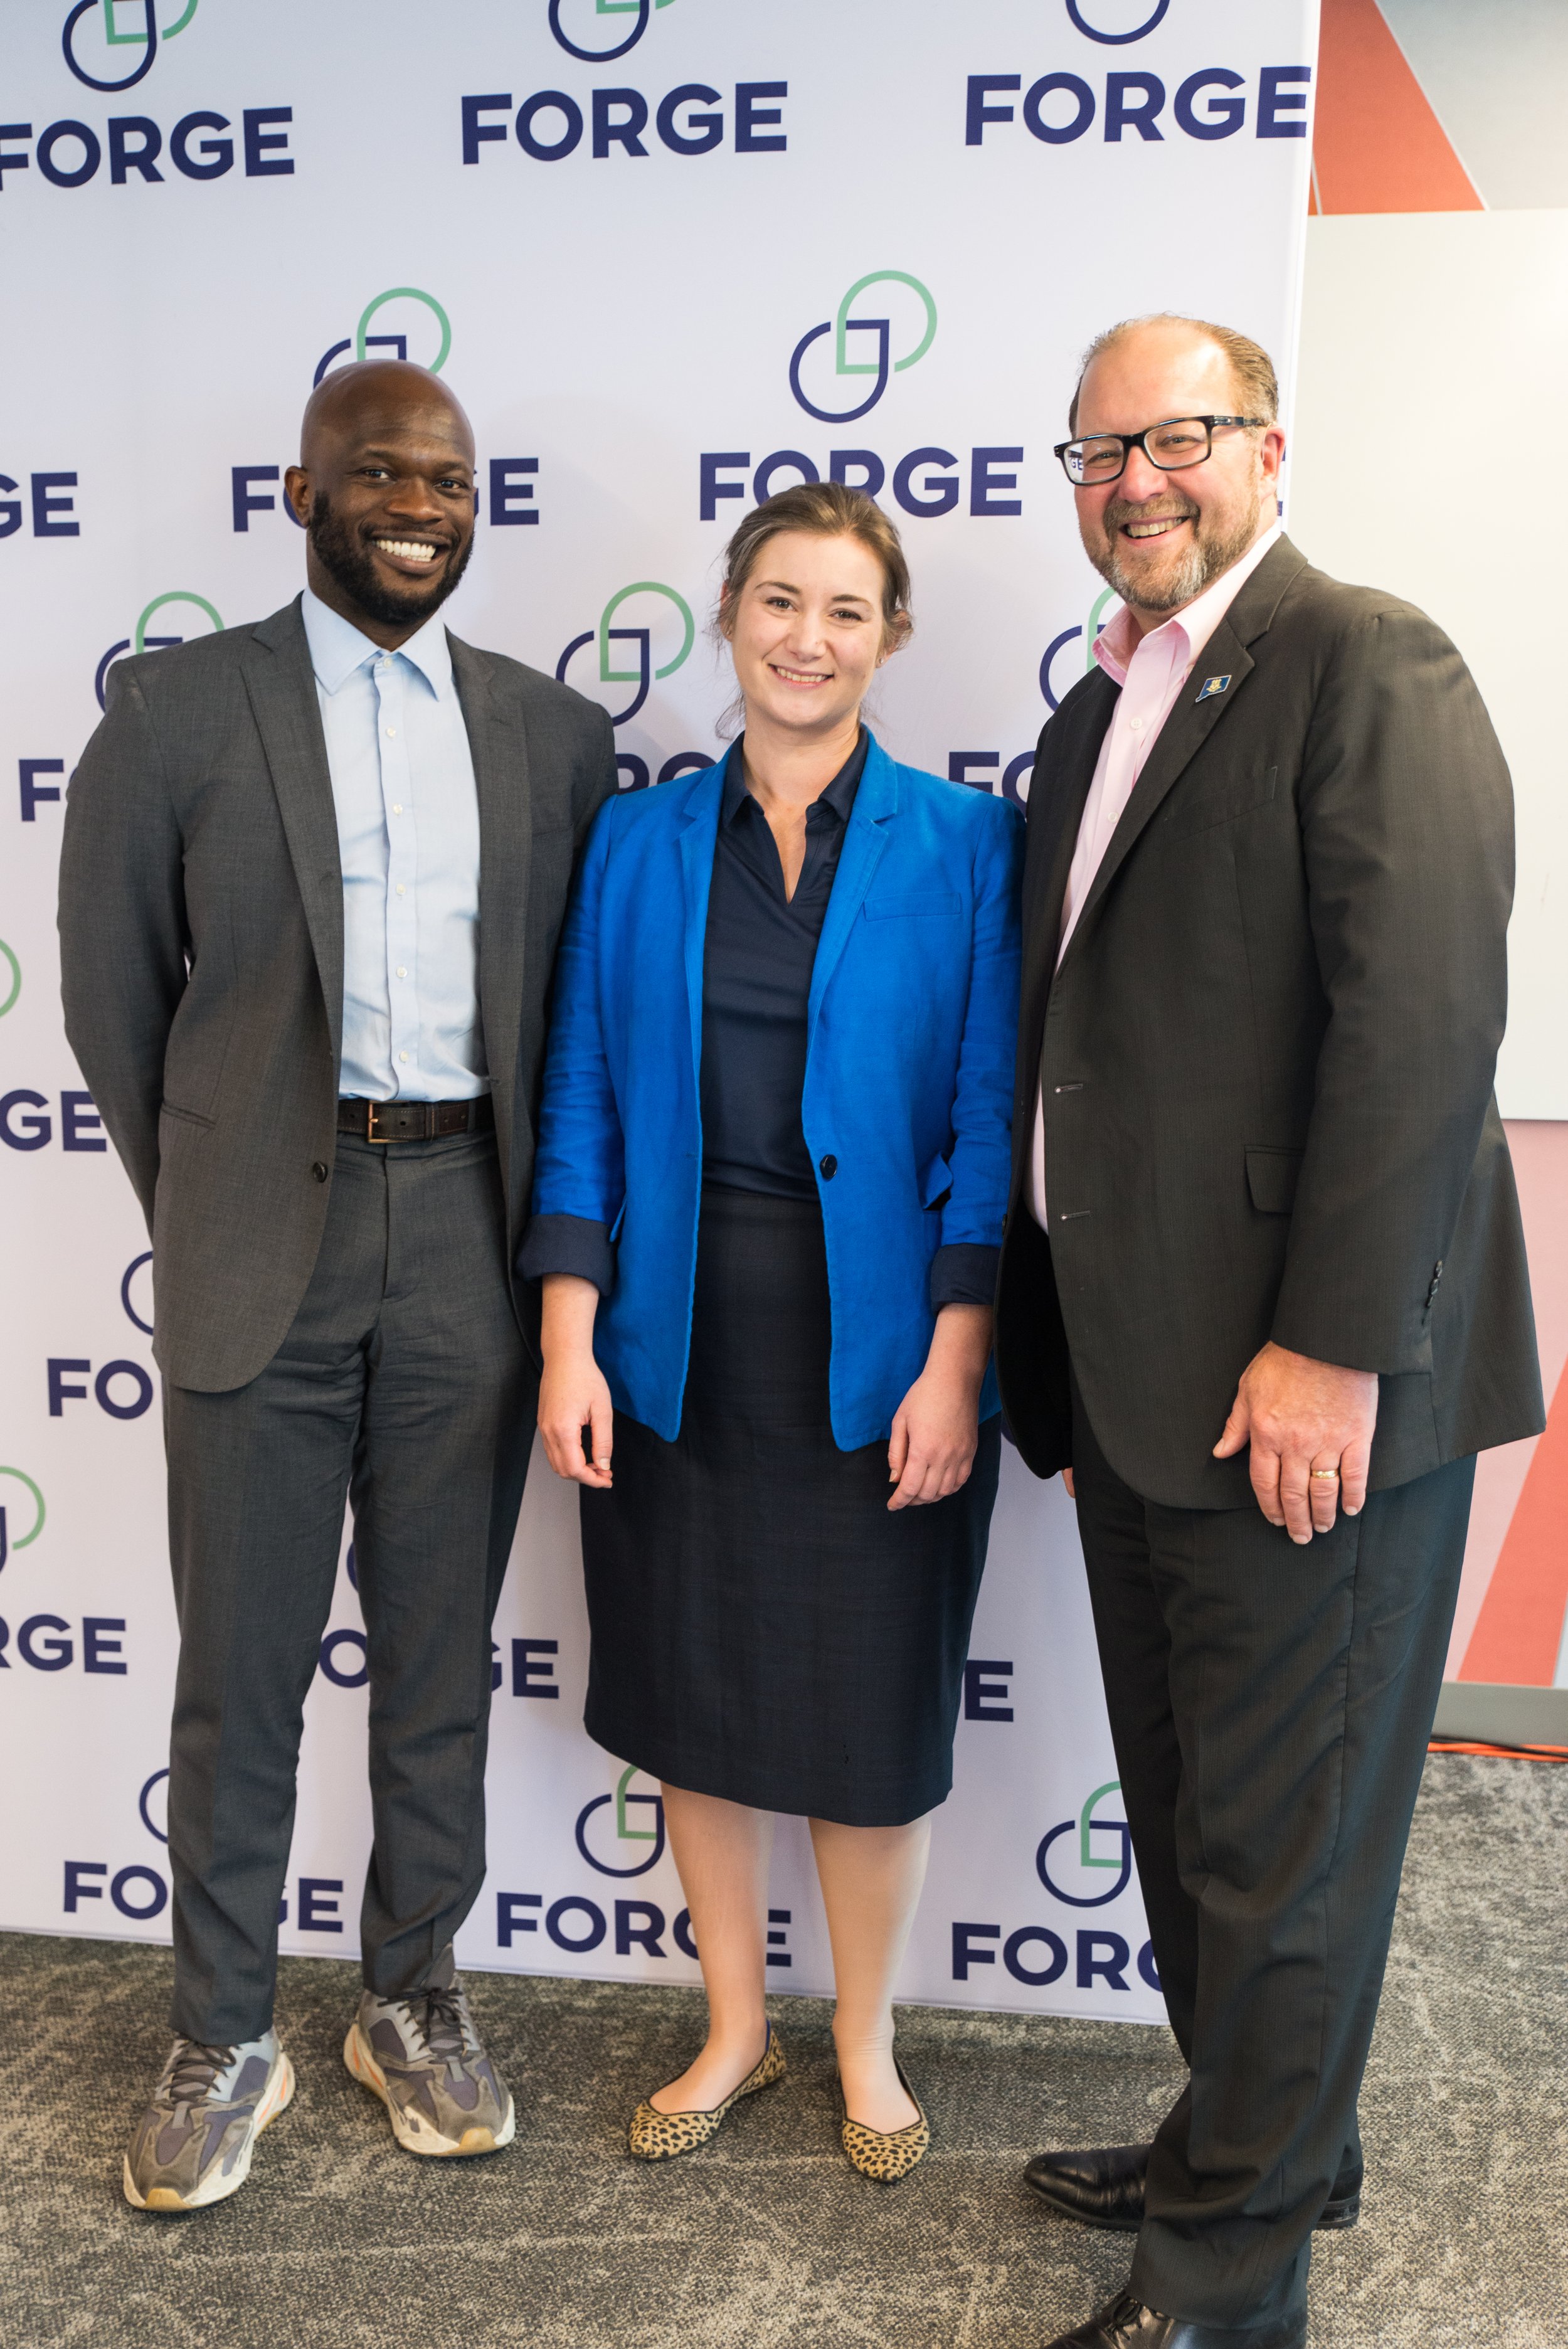  CTNext Executive Director Ony Obiocha, FORGE Executive Director Laura Teicher, and Connecticut Chief Manufacturing Officer Paul Lavoie  